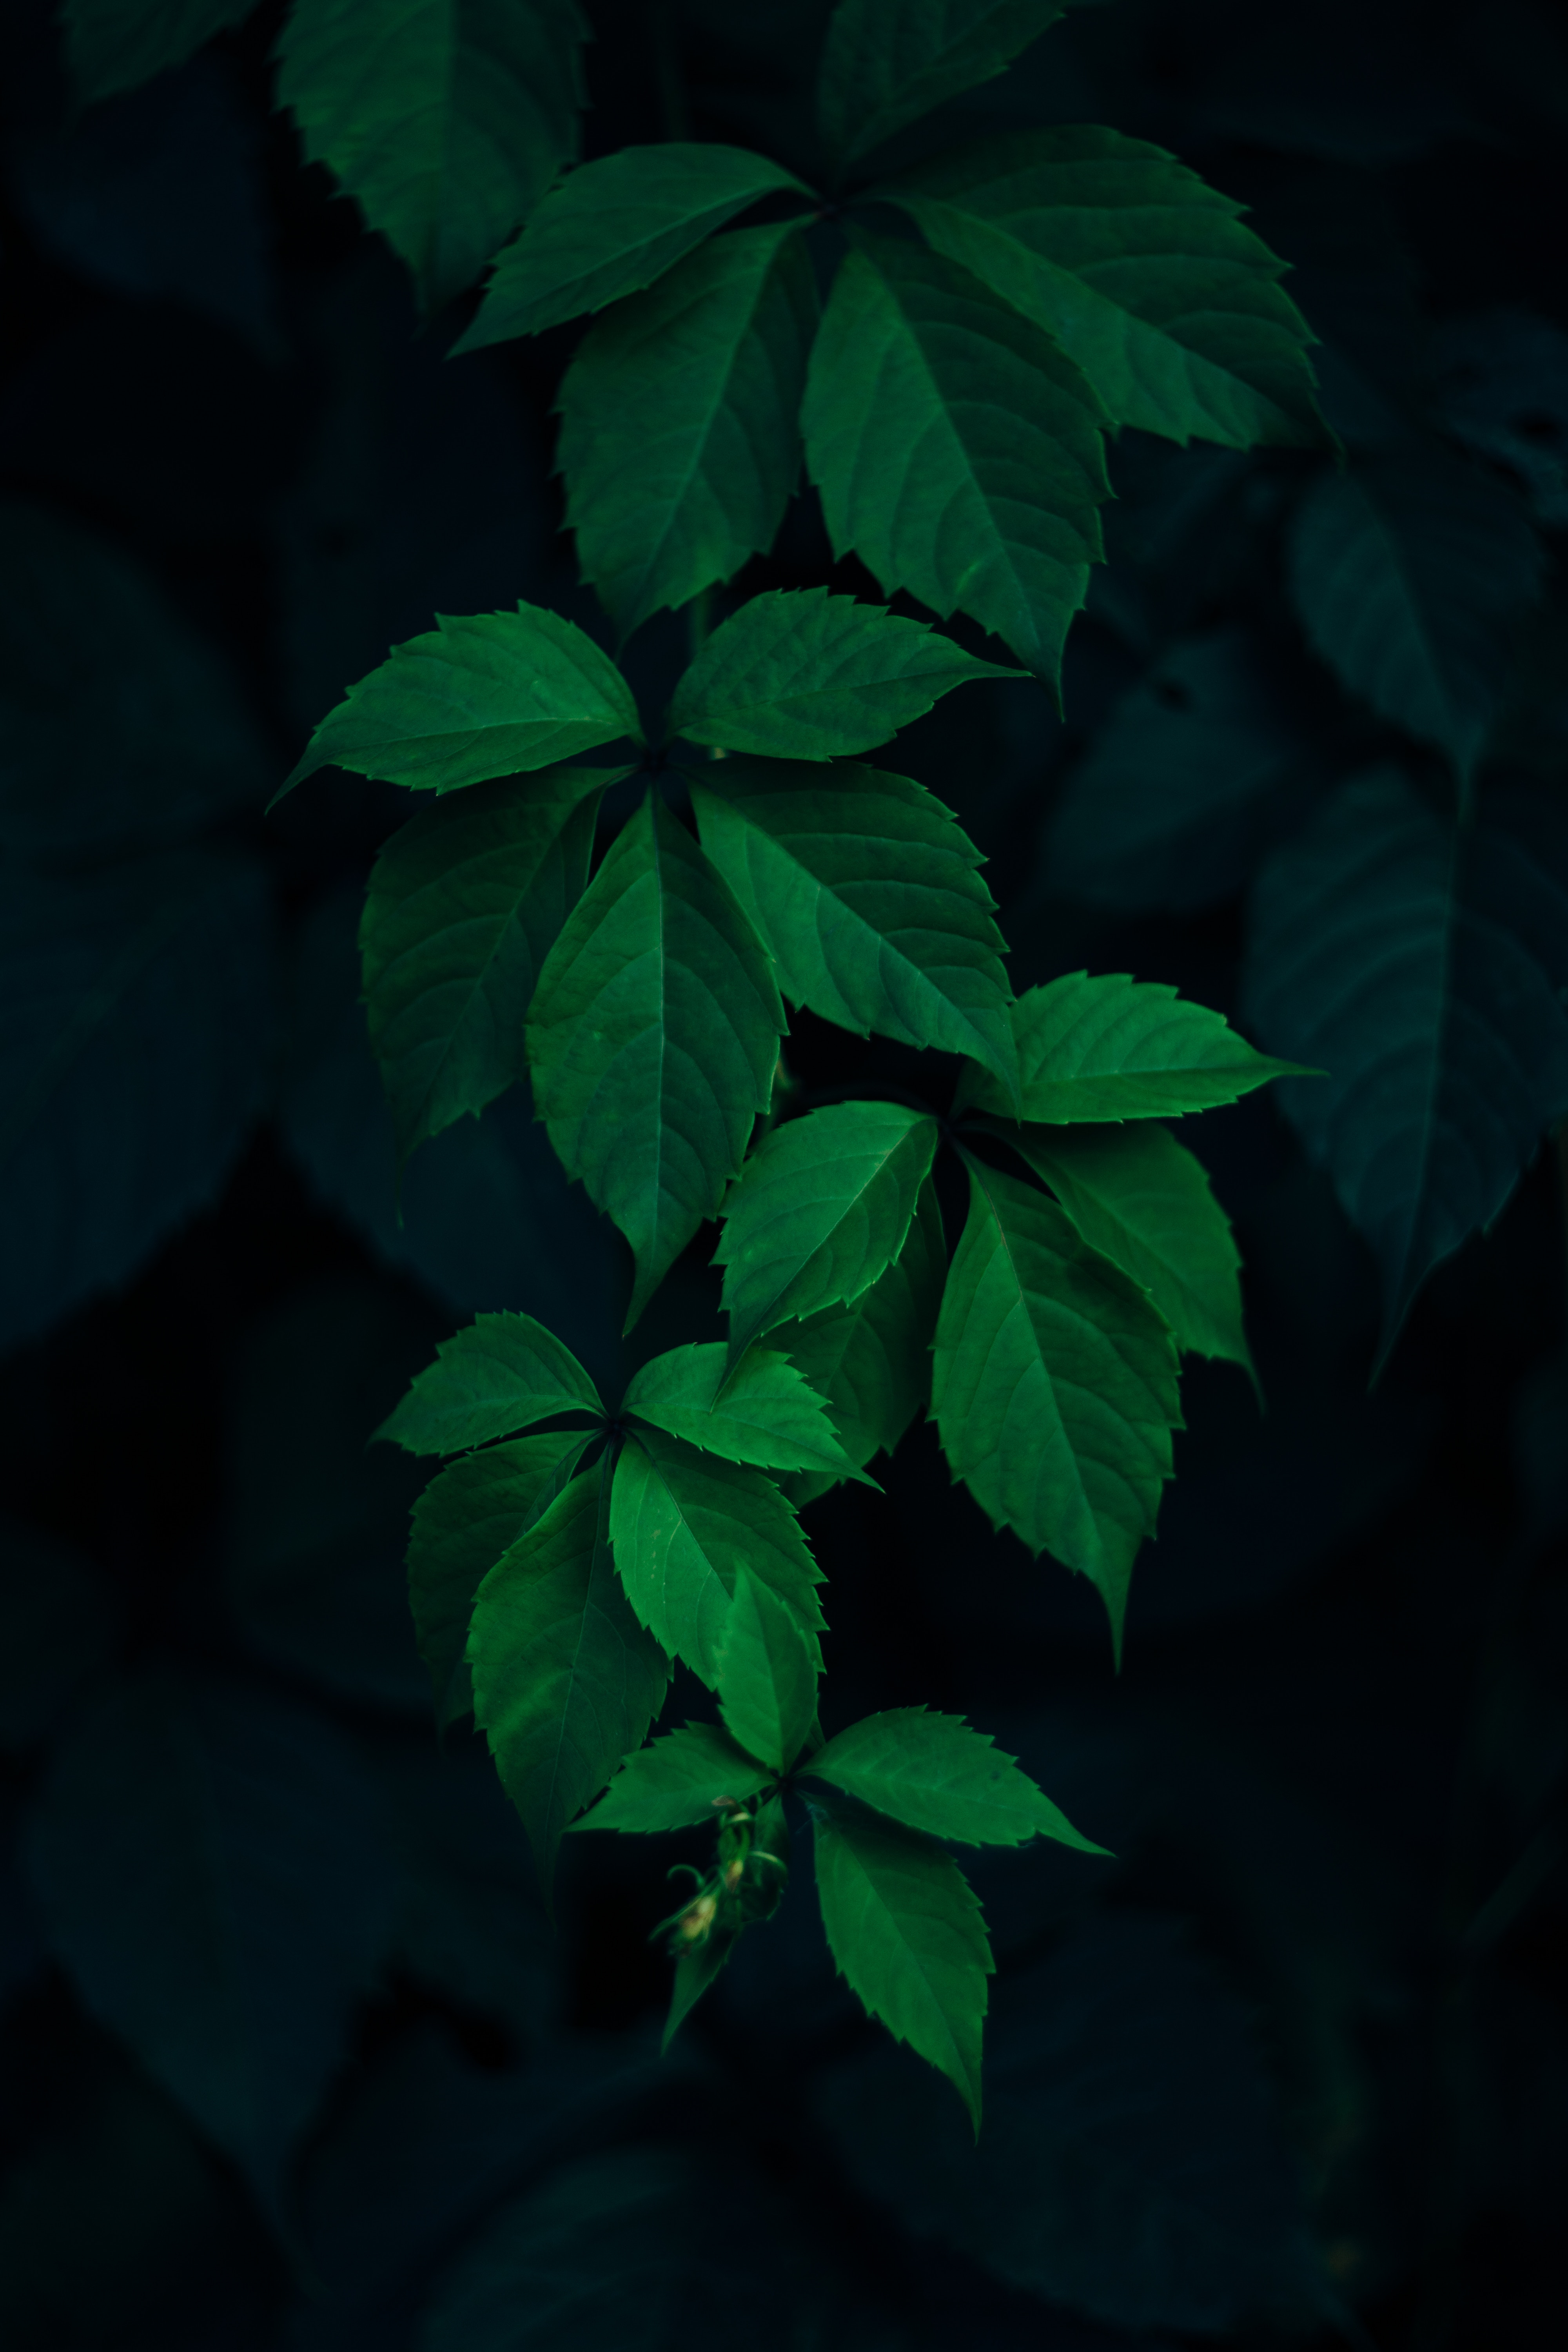 leaves, nature, branches, green, dark background